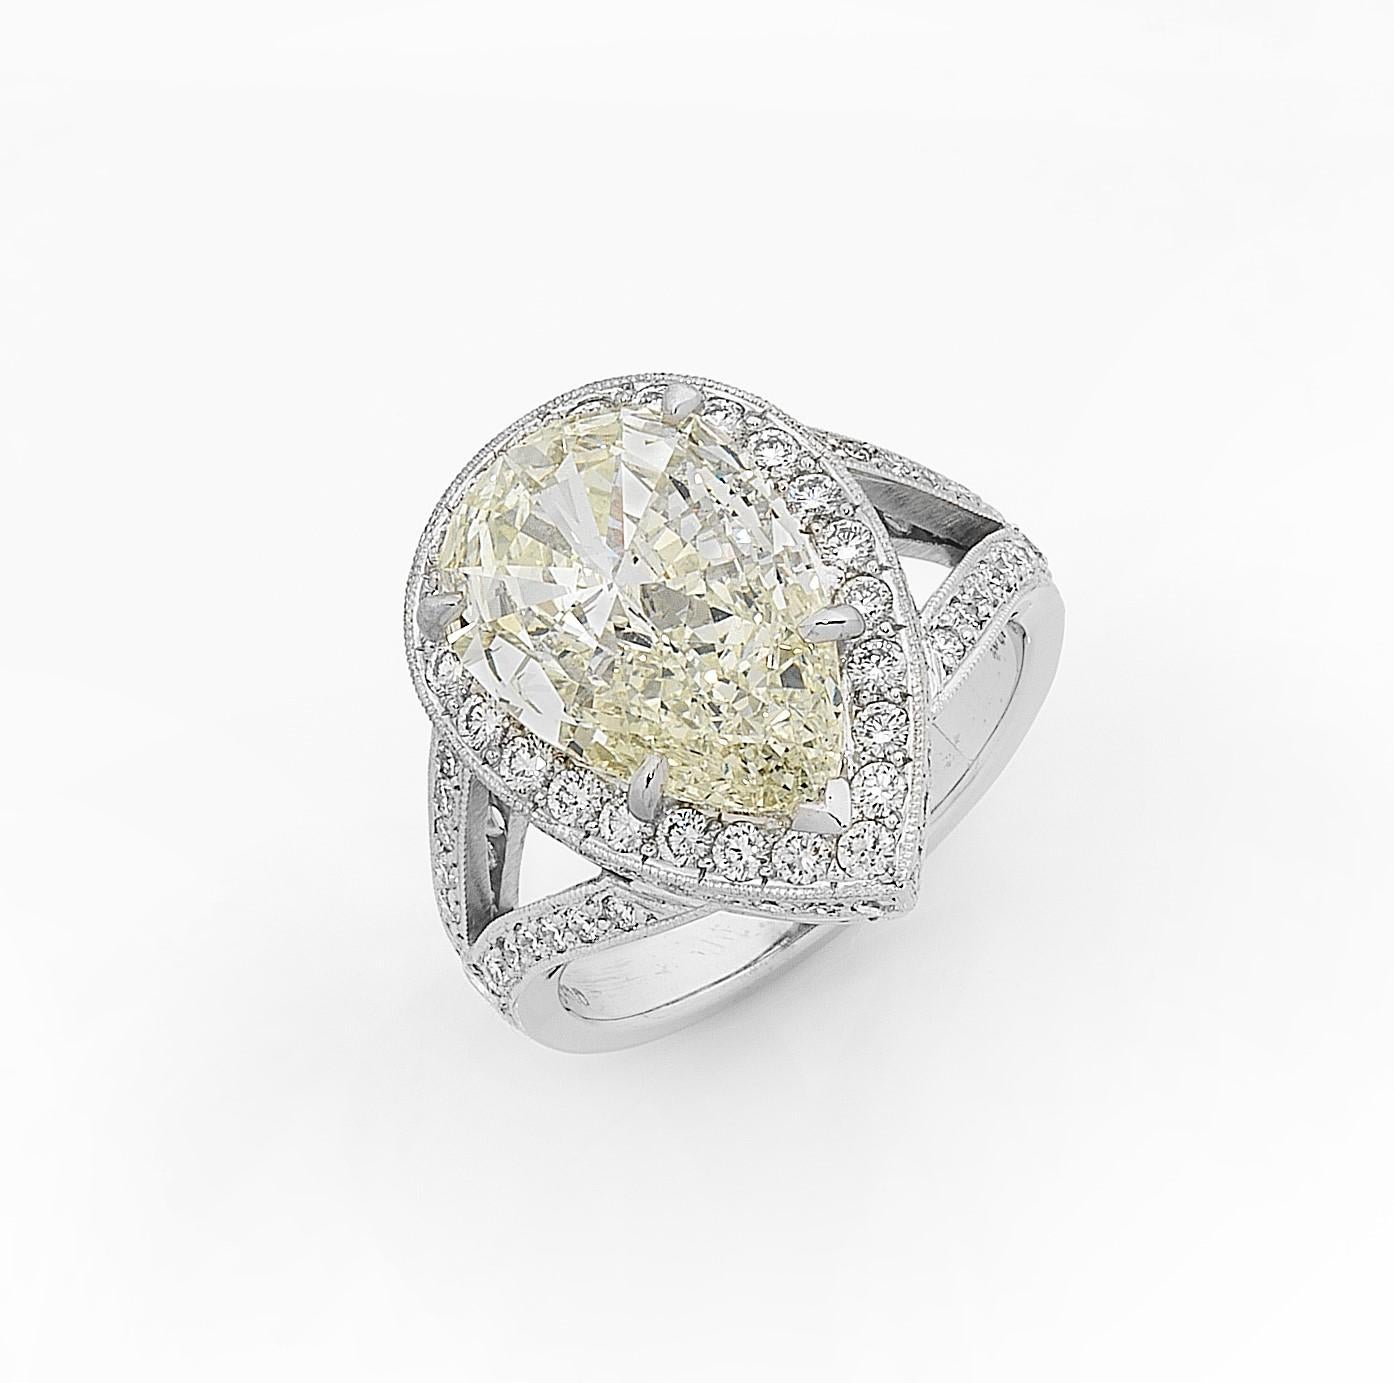 Created and handmade in 18 karat white gold. The elegant Halo style diamond cluster ring is centered with one pear shape diamond surrounded by eighty three milligrain set brilliant cut diamonds.
Diamonds
1=4.60ct pear shape- Auscert (Australian